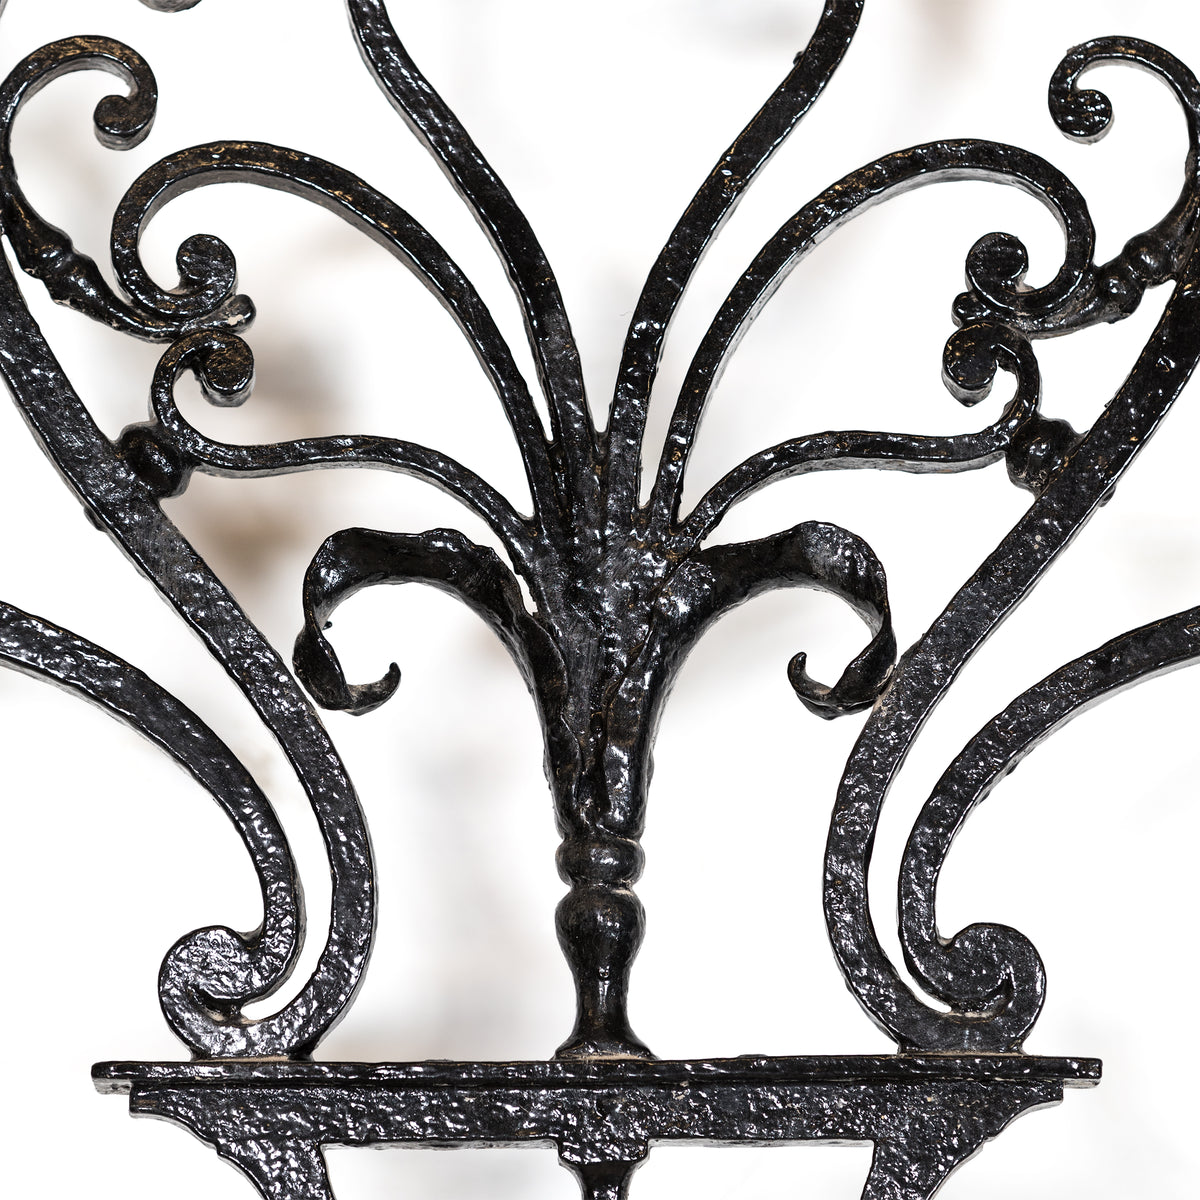 Large Ornate Mid 19th Century Wrought Iron Gate with Light | The Architectural Forum